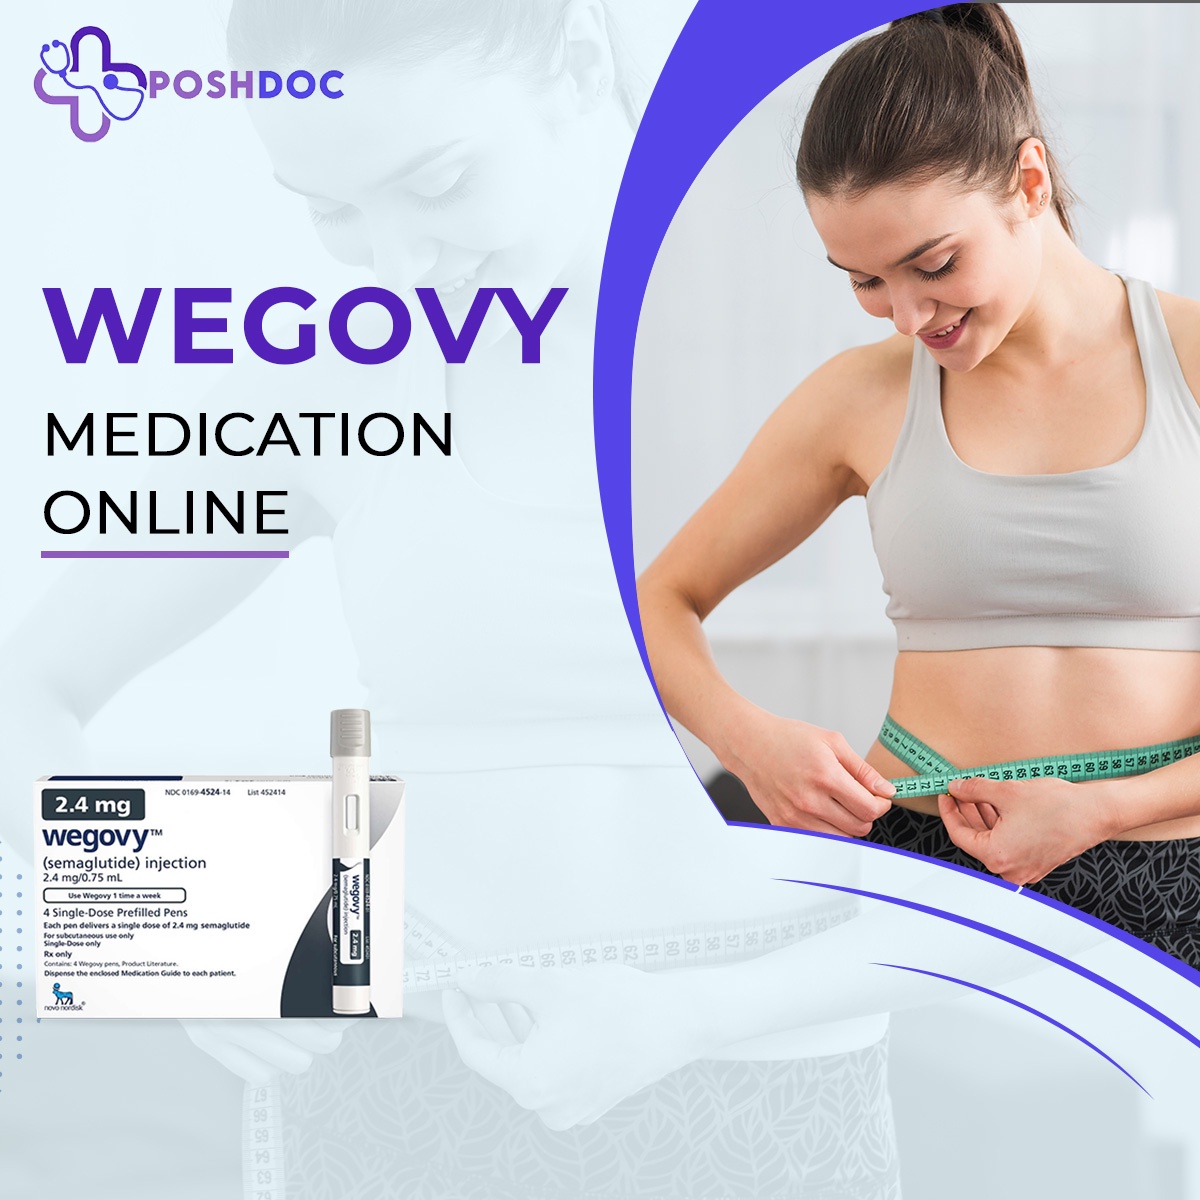 Buying Wegovy Online: What You Need to Know?